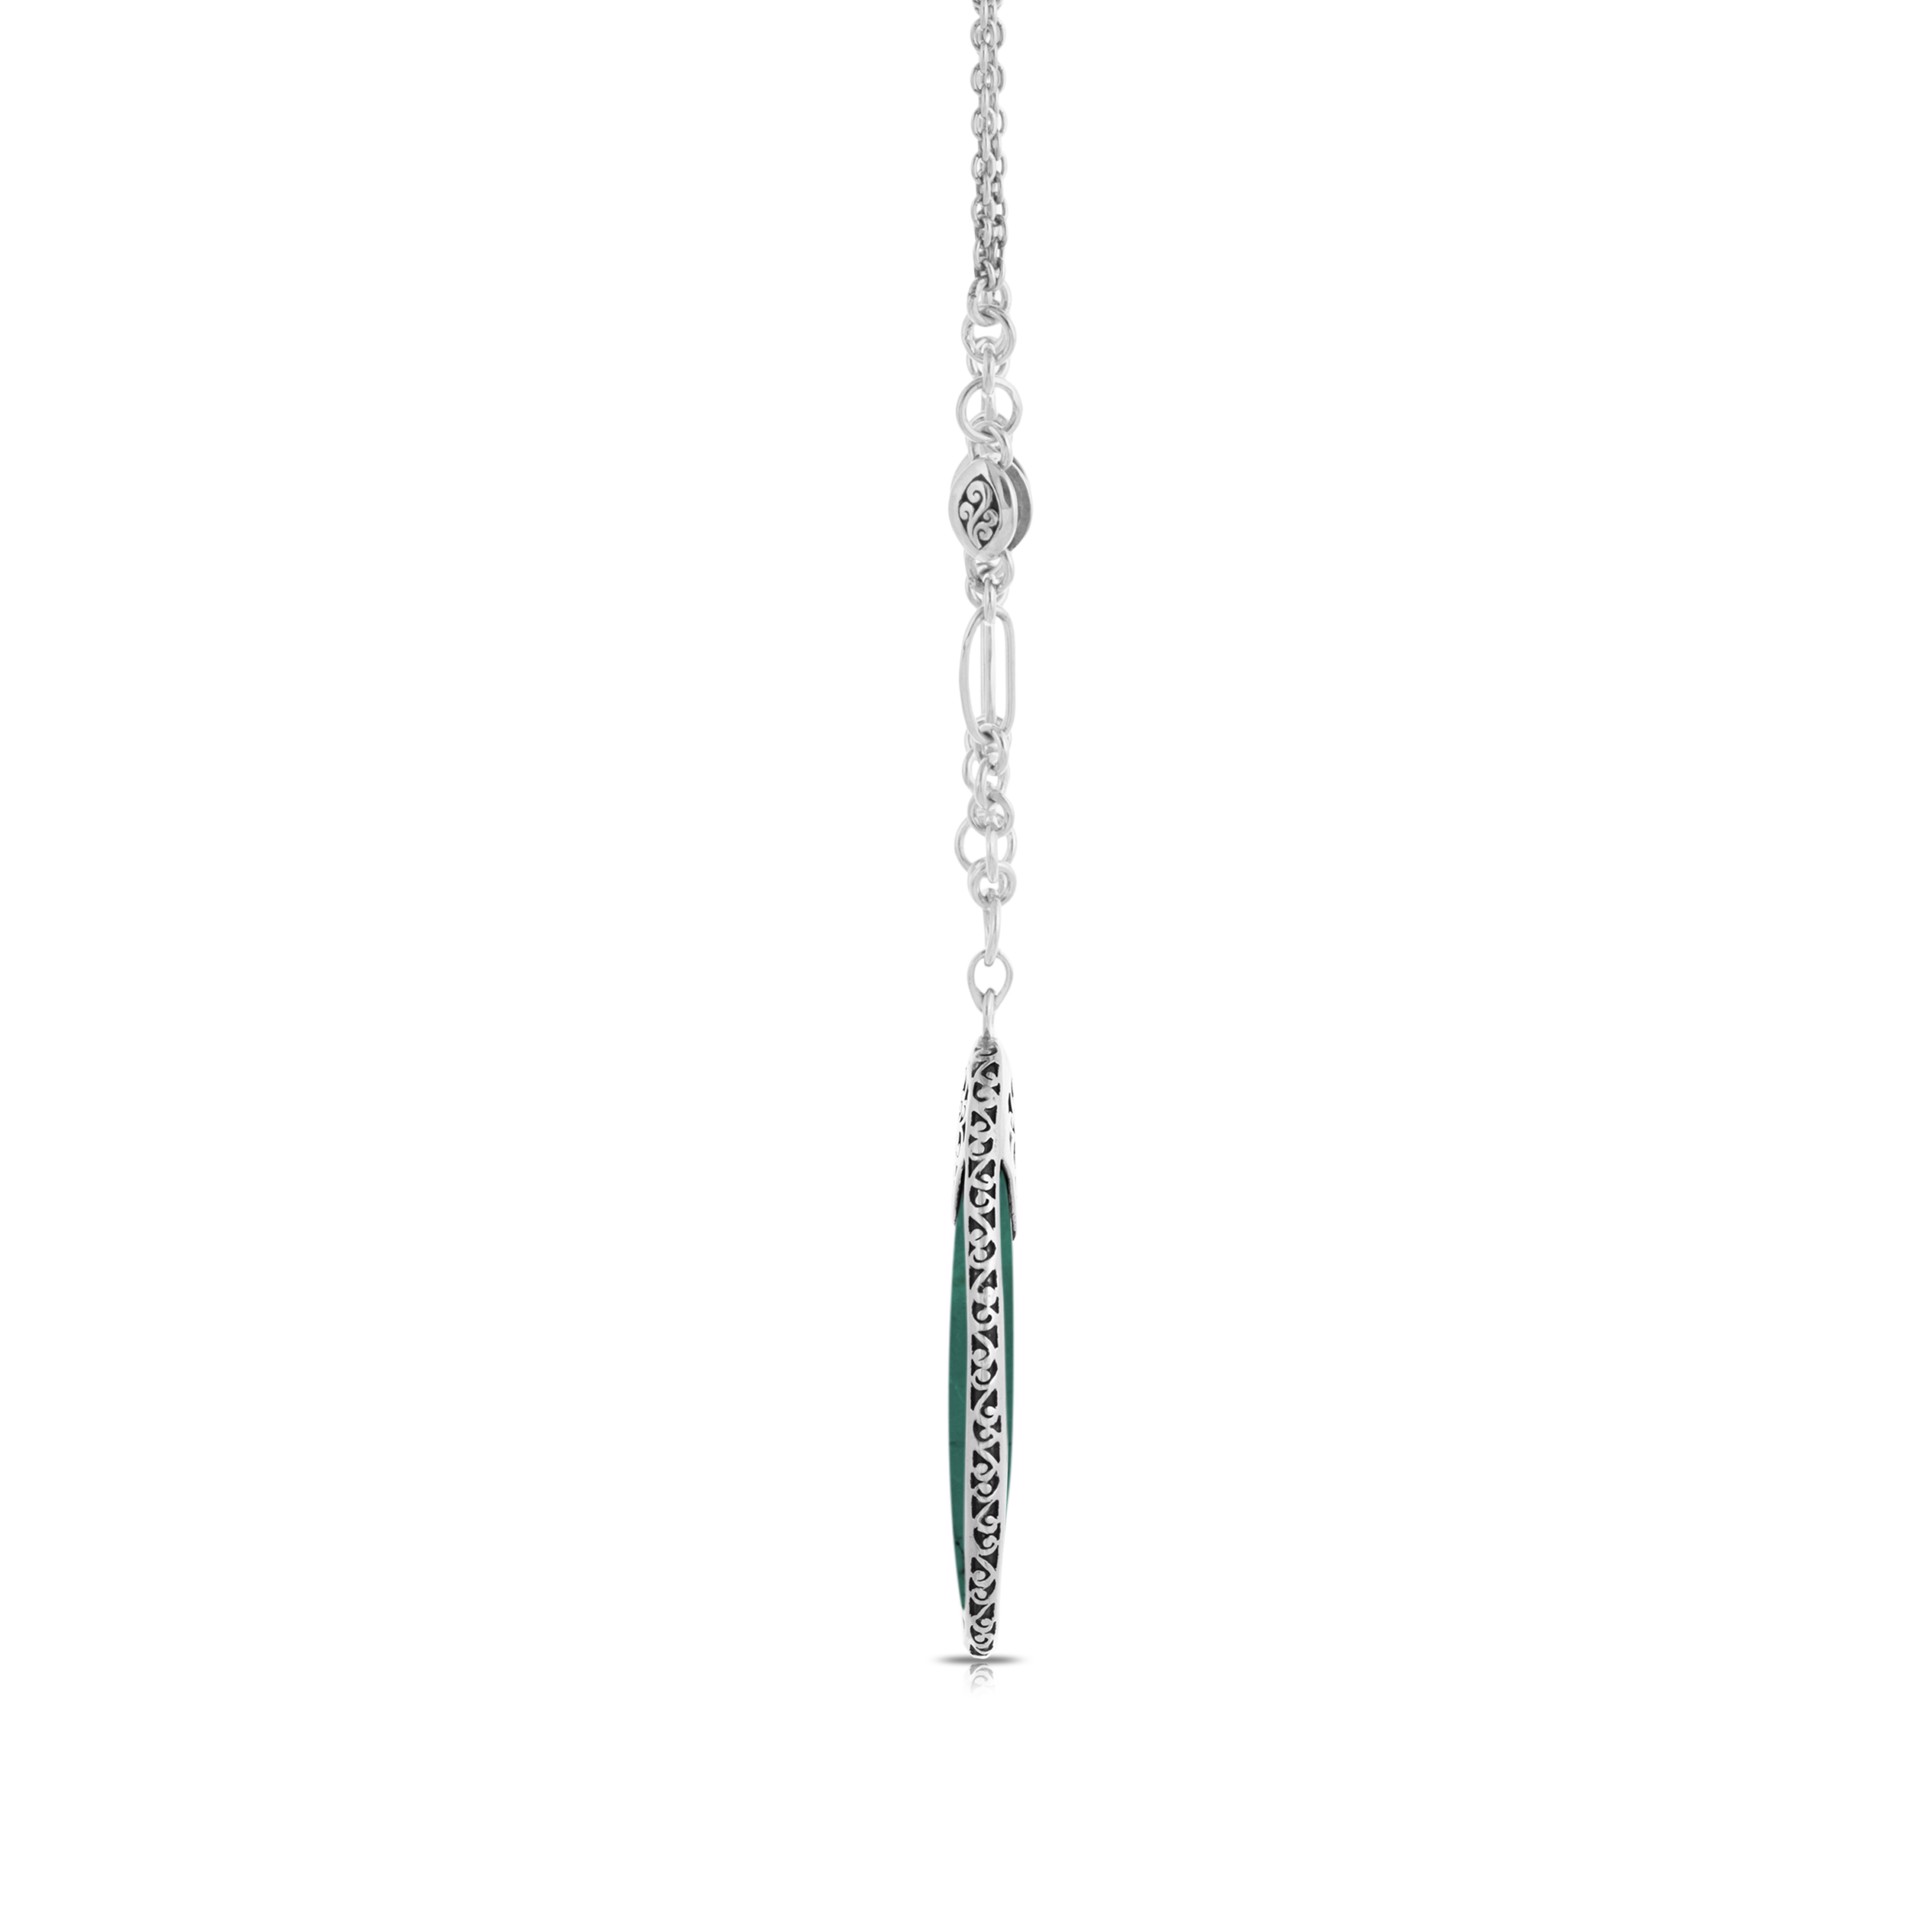 9704 Organic Shaped Turquoise with Hand Carved Scroll Rim and Back on Handmade Sterling Silver Chain, Pendant is 38 by 55mm by Lois Hill